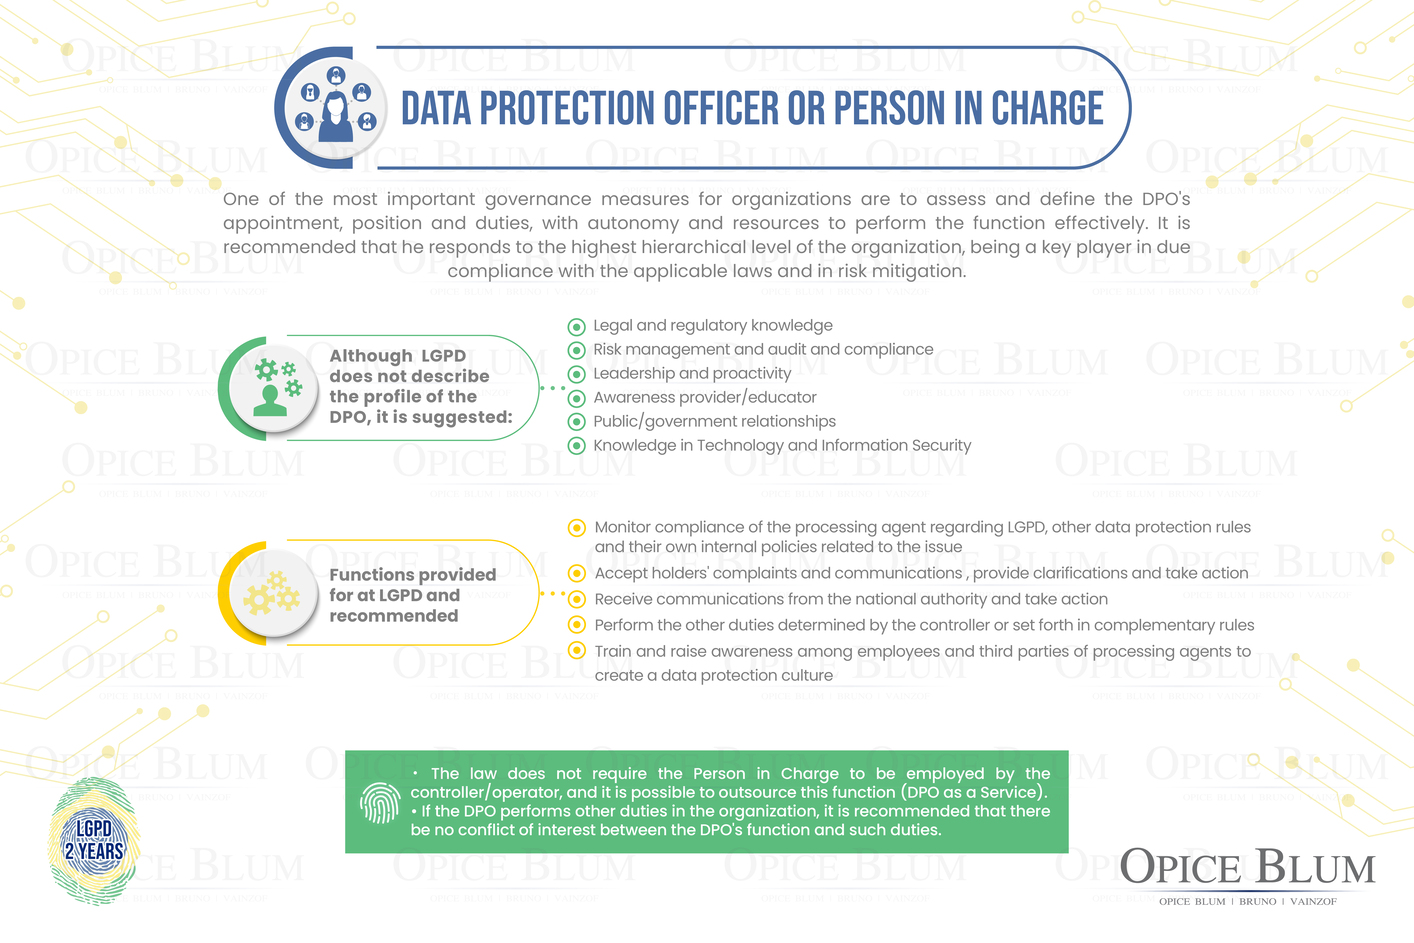 Infographic - Data Protection Officer Or Person In Charge